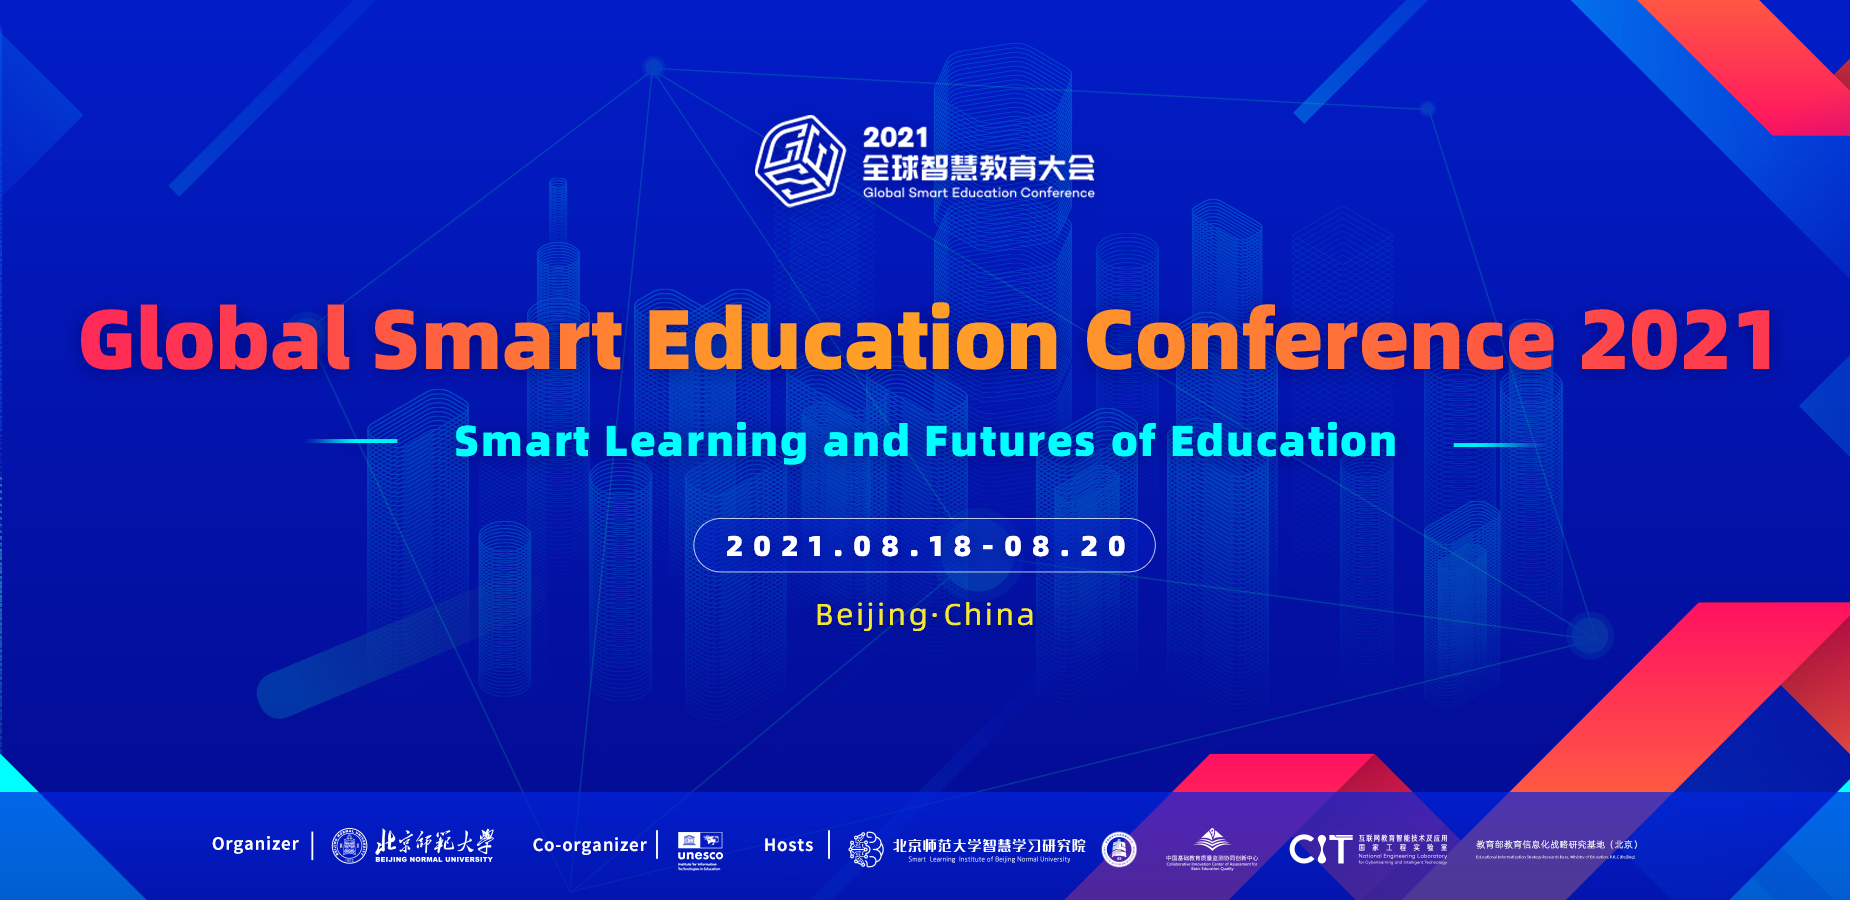 The Global Smart Education Conference 2021 To Be Held 18-20 August In Beijing, China